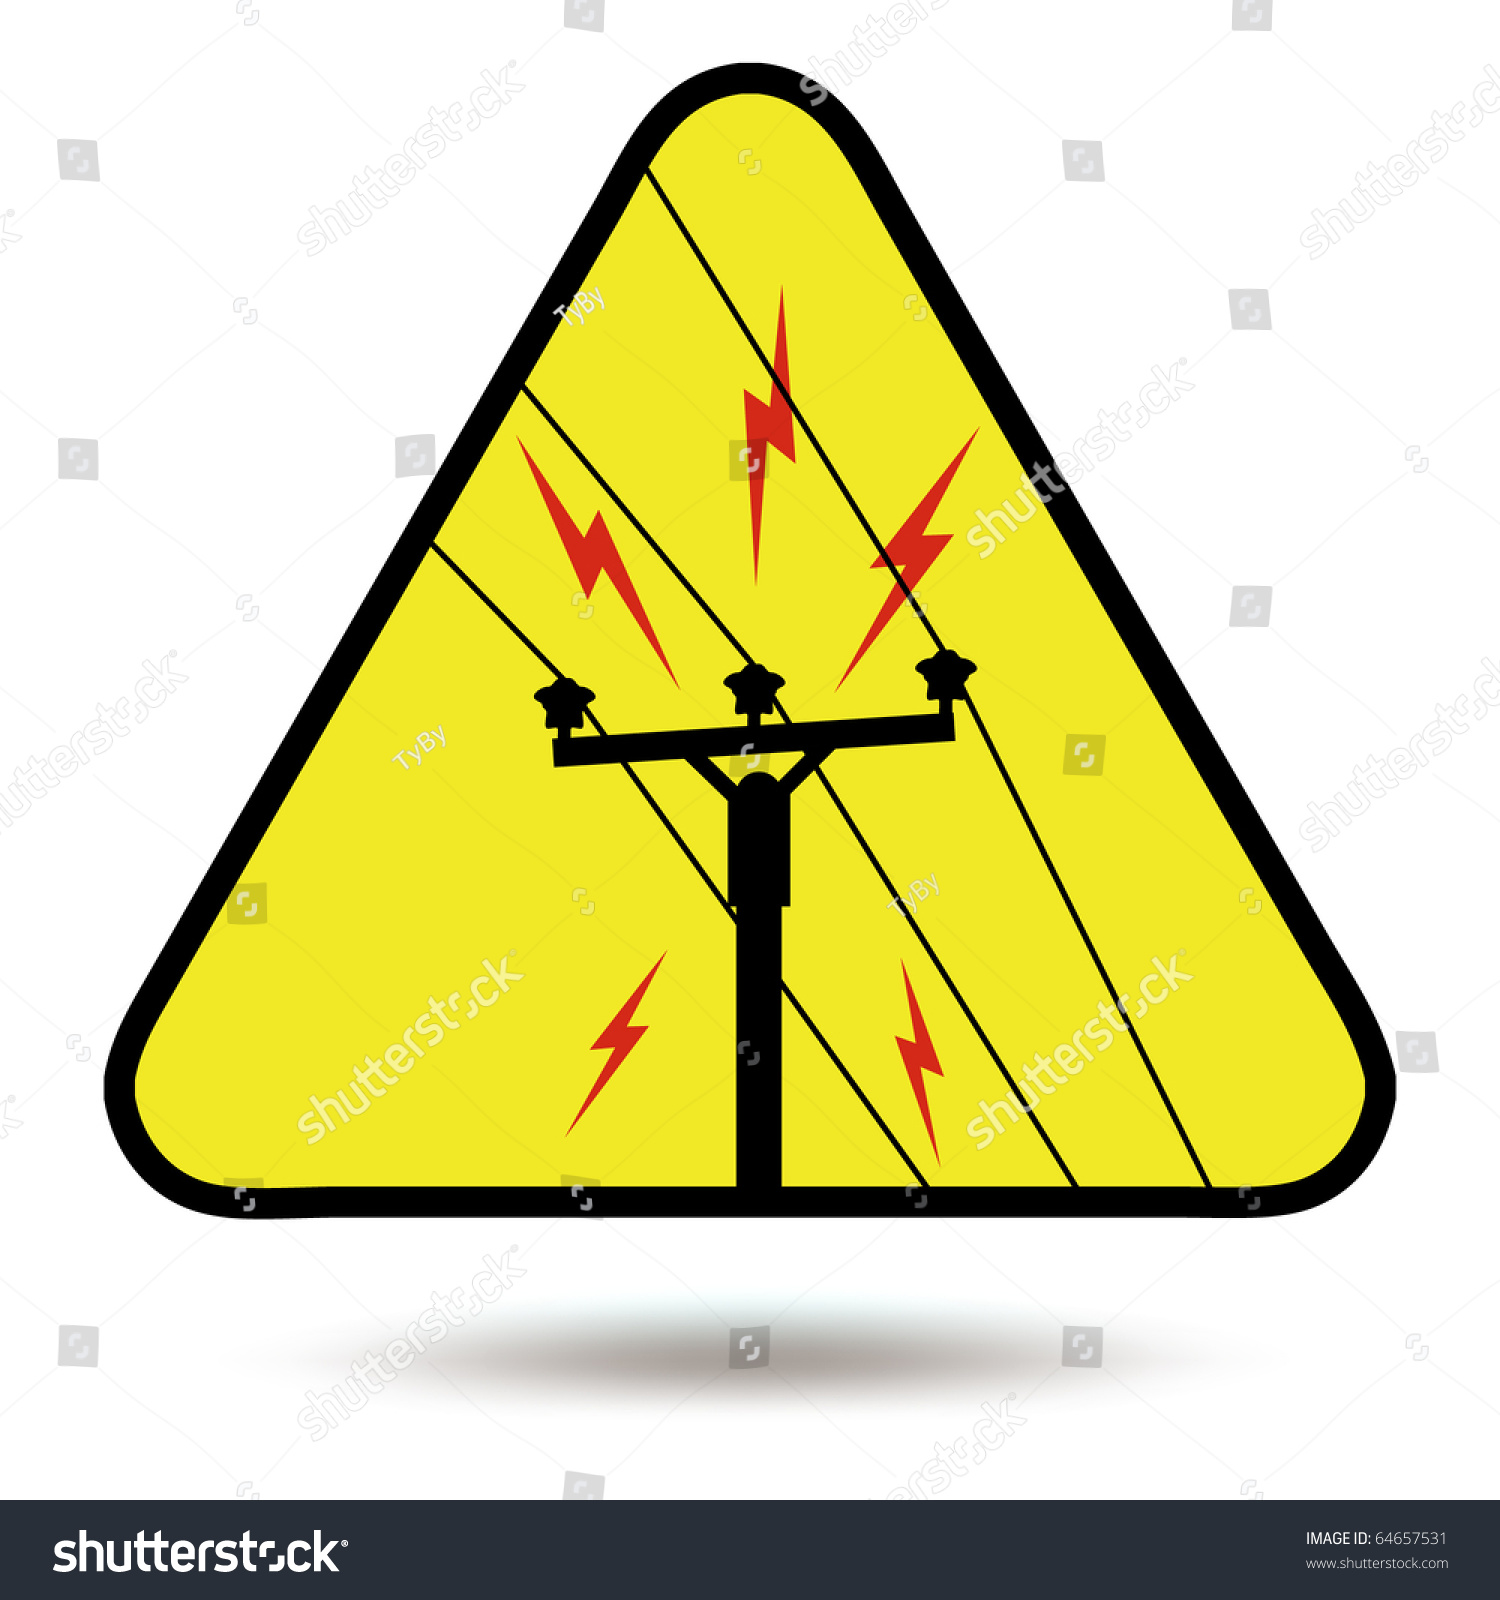 Image Result For Electricity Signs Symbols